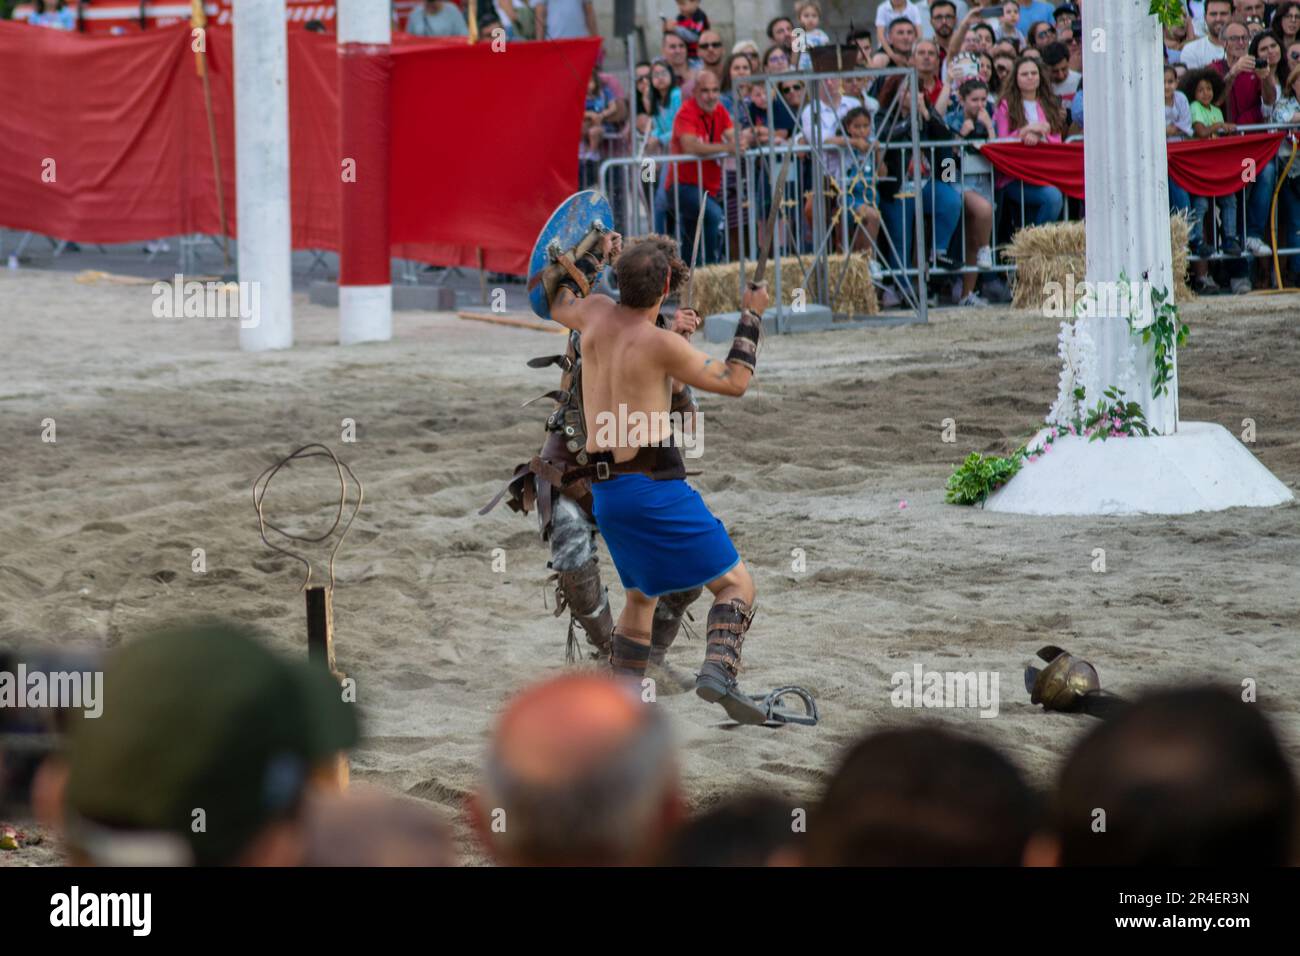 Roman games, gladiators fighting for life, theatrical fight of Roman gladiators. War games. Gladiators performing for crowded spectators. Stock Photo